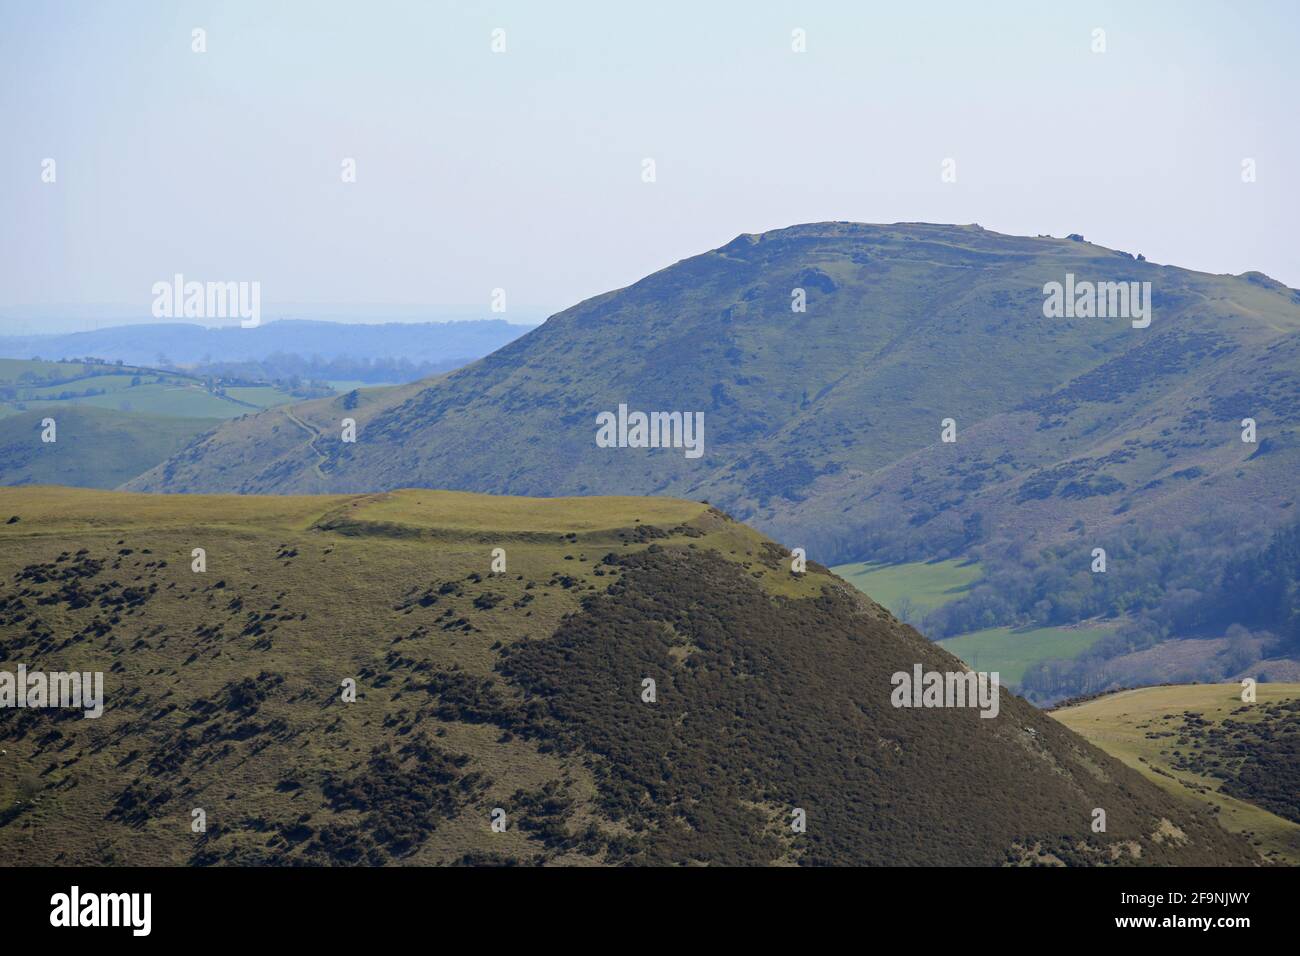 Bodbury ring ancient hillfort above the Carding mill valley, Church Stretton, Shropshire, England, UK. Stock Photo